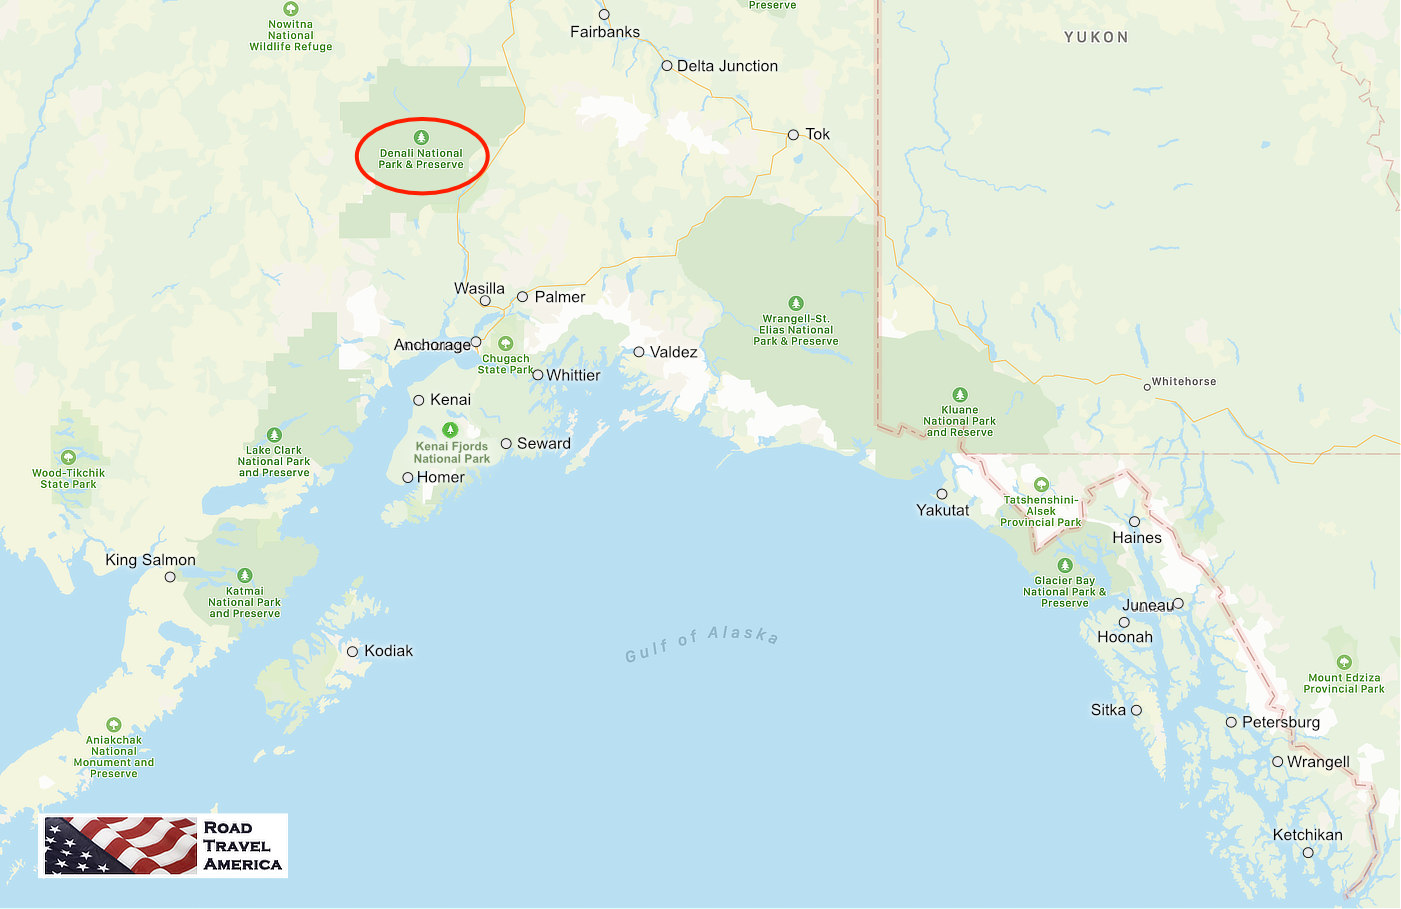 Map showing the location of Denali National Park & Preserve relative to other Alaska cities, parks and preserves